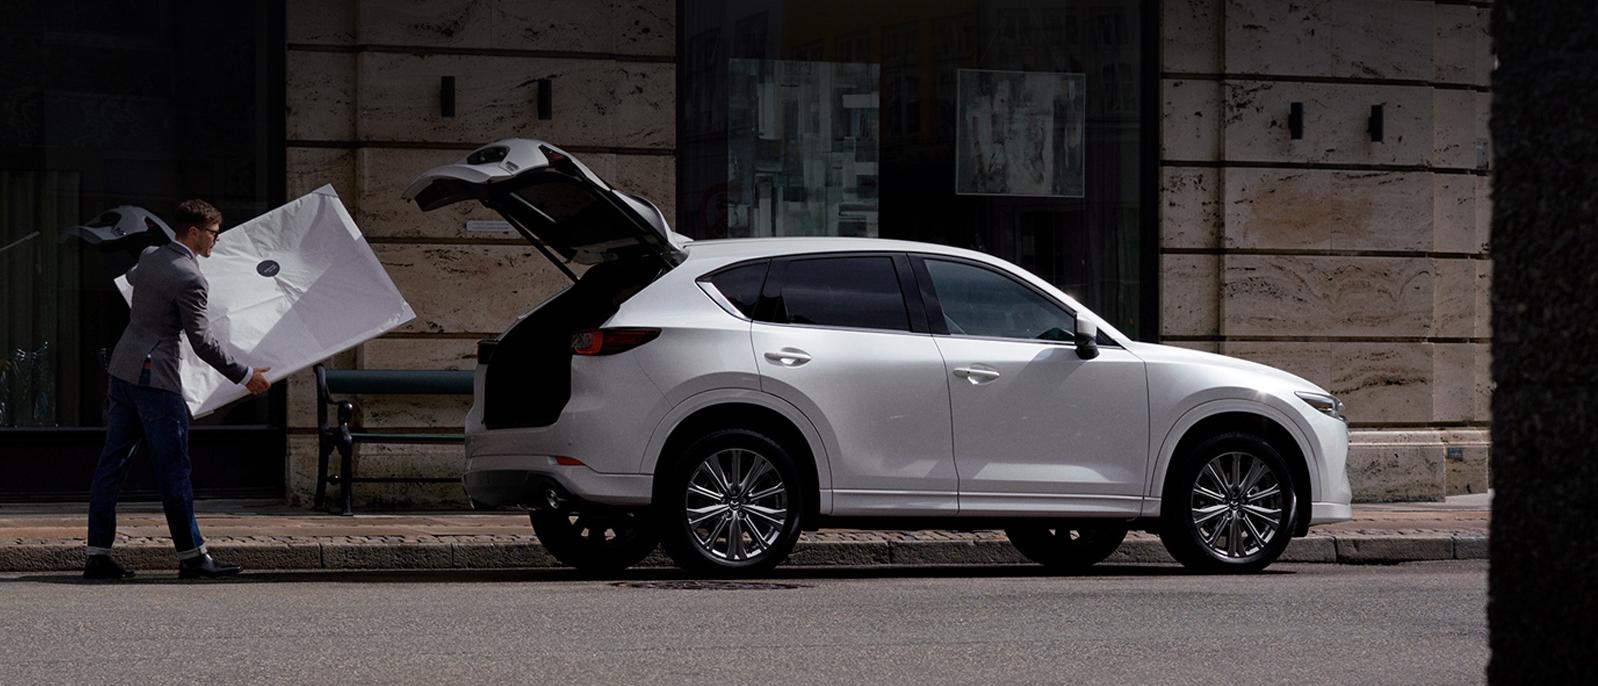 A 2022 Mazda CX-5 parked on the street.